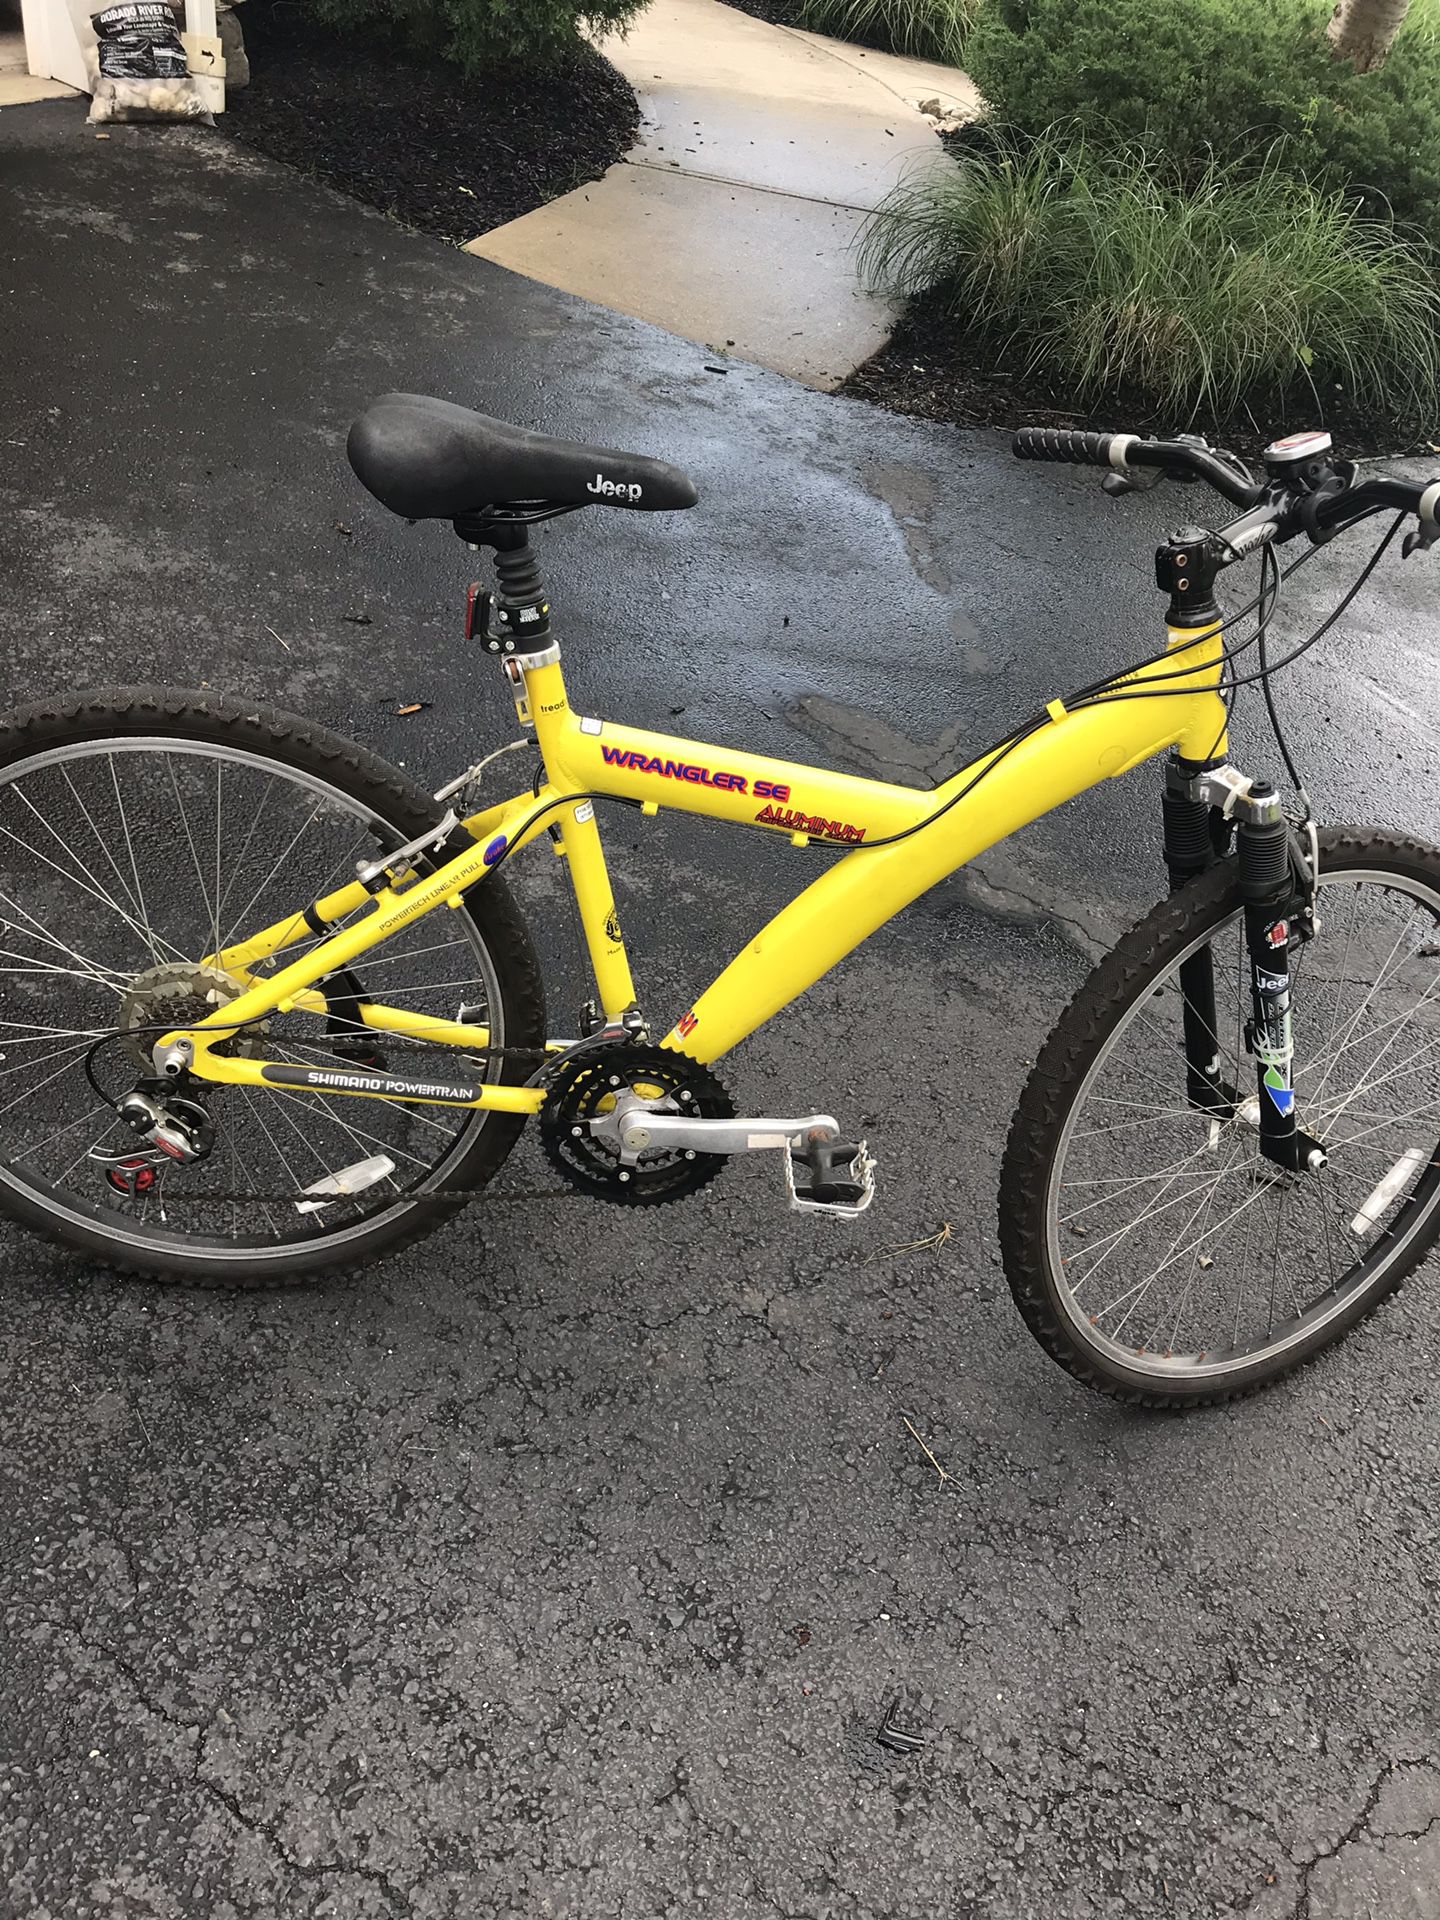 RARE Vintage Jeep Wrangler SE Sport Bicycle Bike Yellow Amoeba Aluminum  PowerTec for Sale in Holland, PA - OfferUp